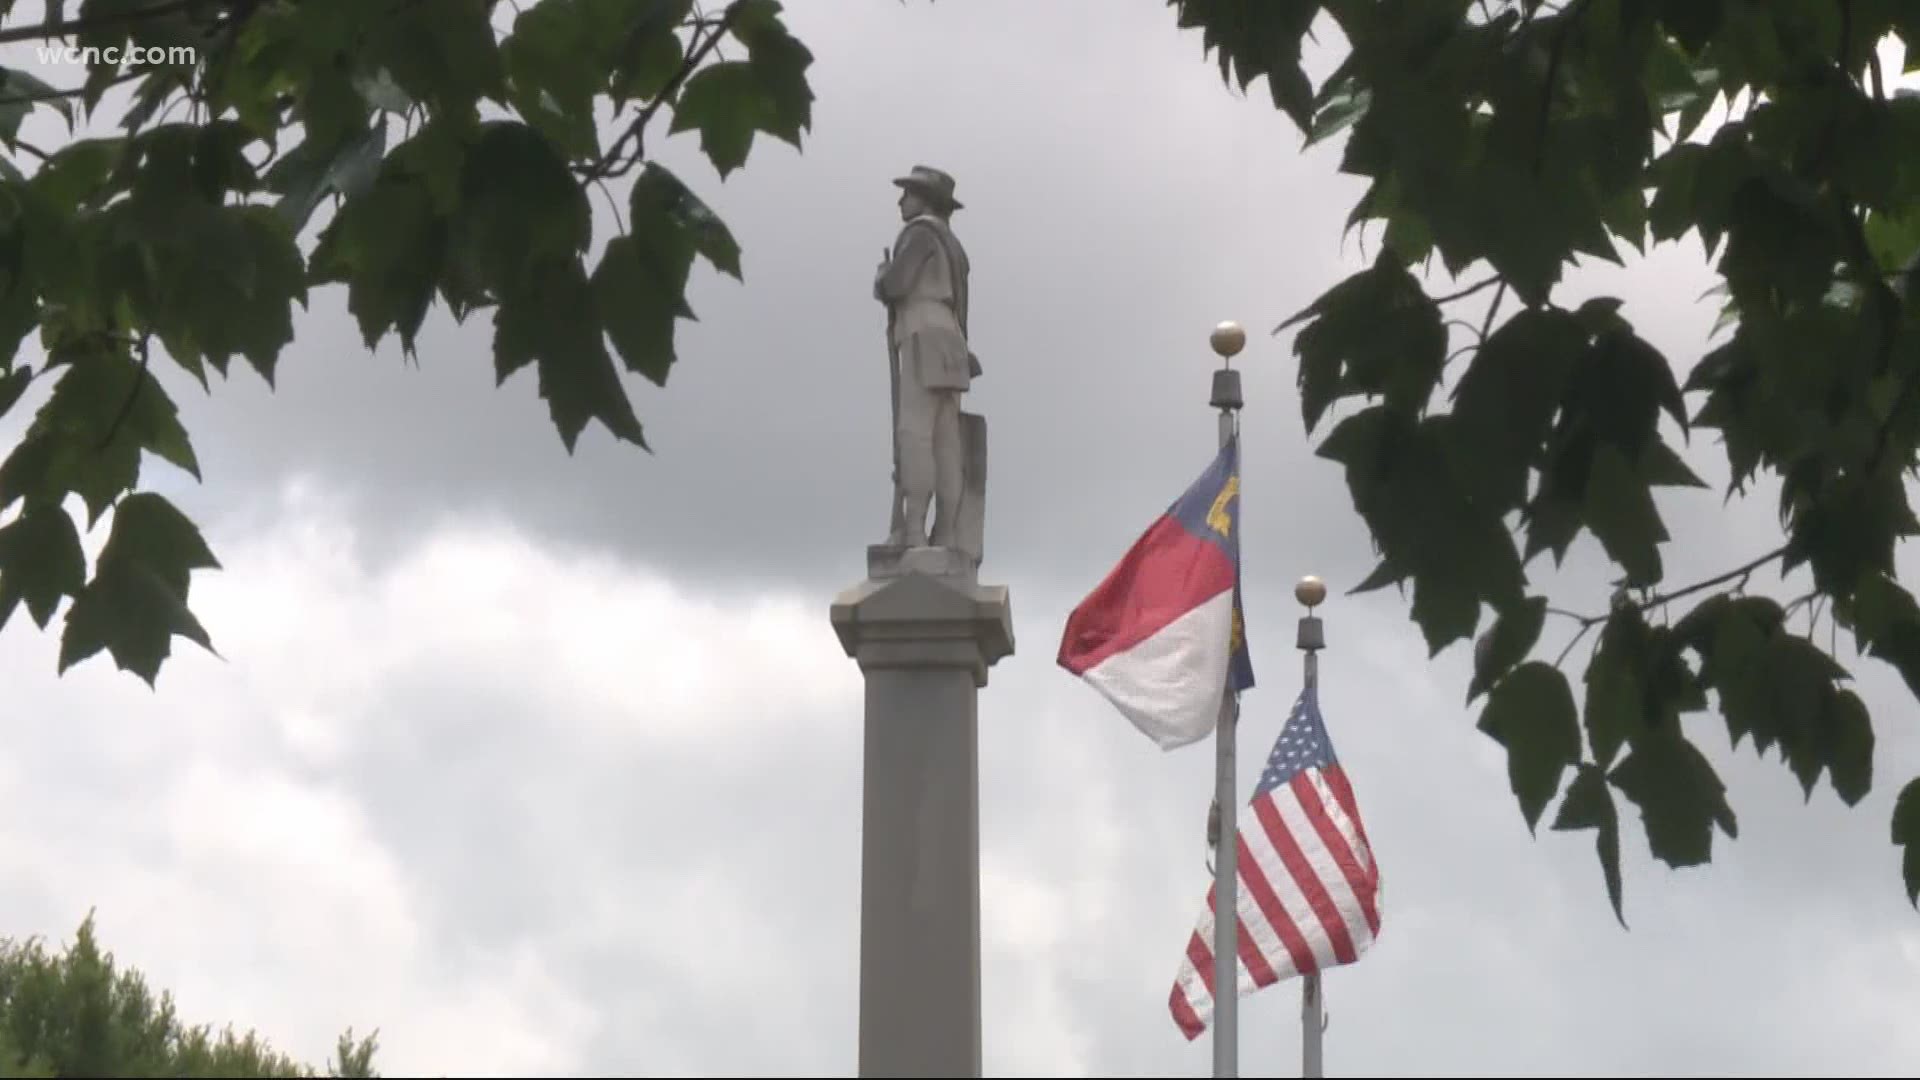 Some activists are calling for the confederate soldiers monument to be instead placed in a museum.